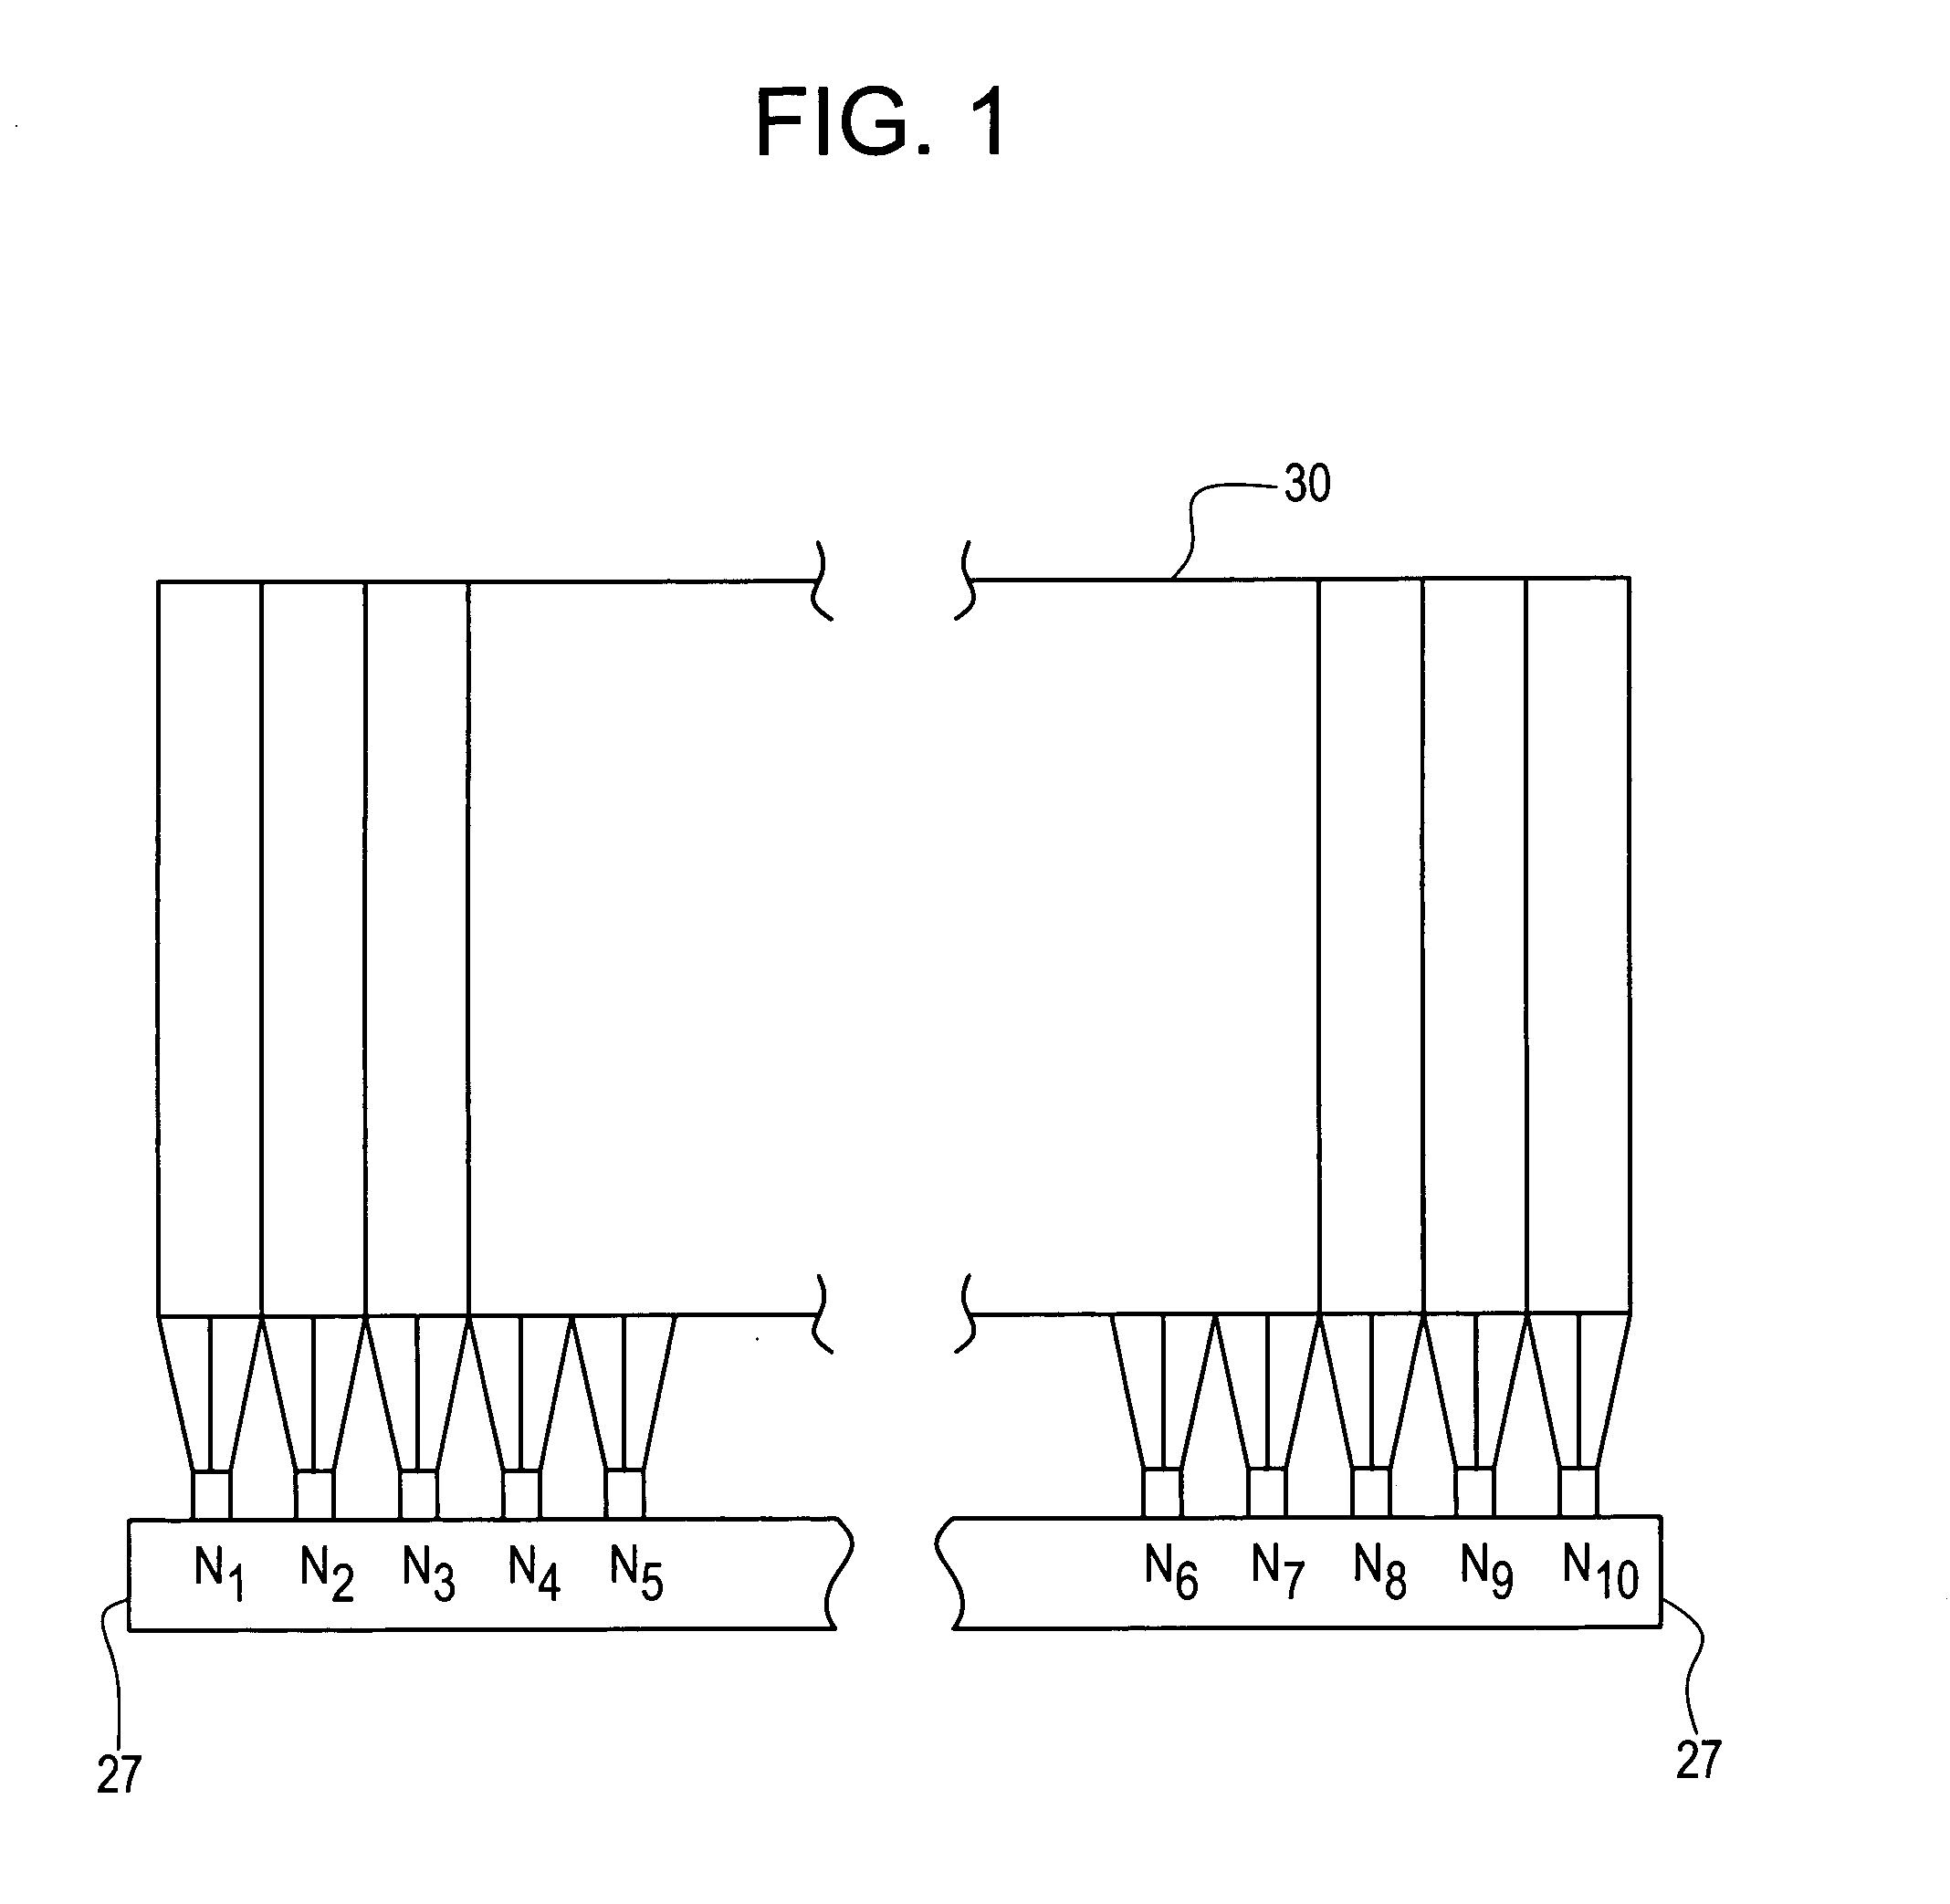 System and method to control press section dewatering on paper and pulp drying machines using chemical dewatering agents